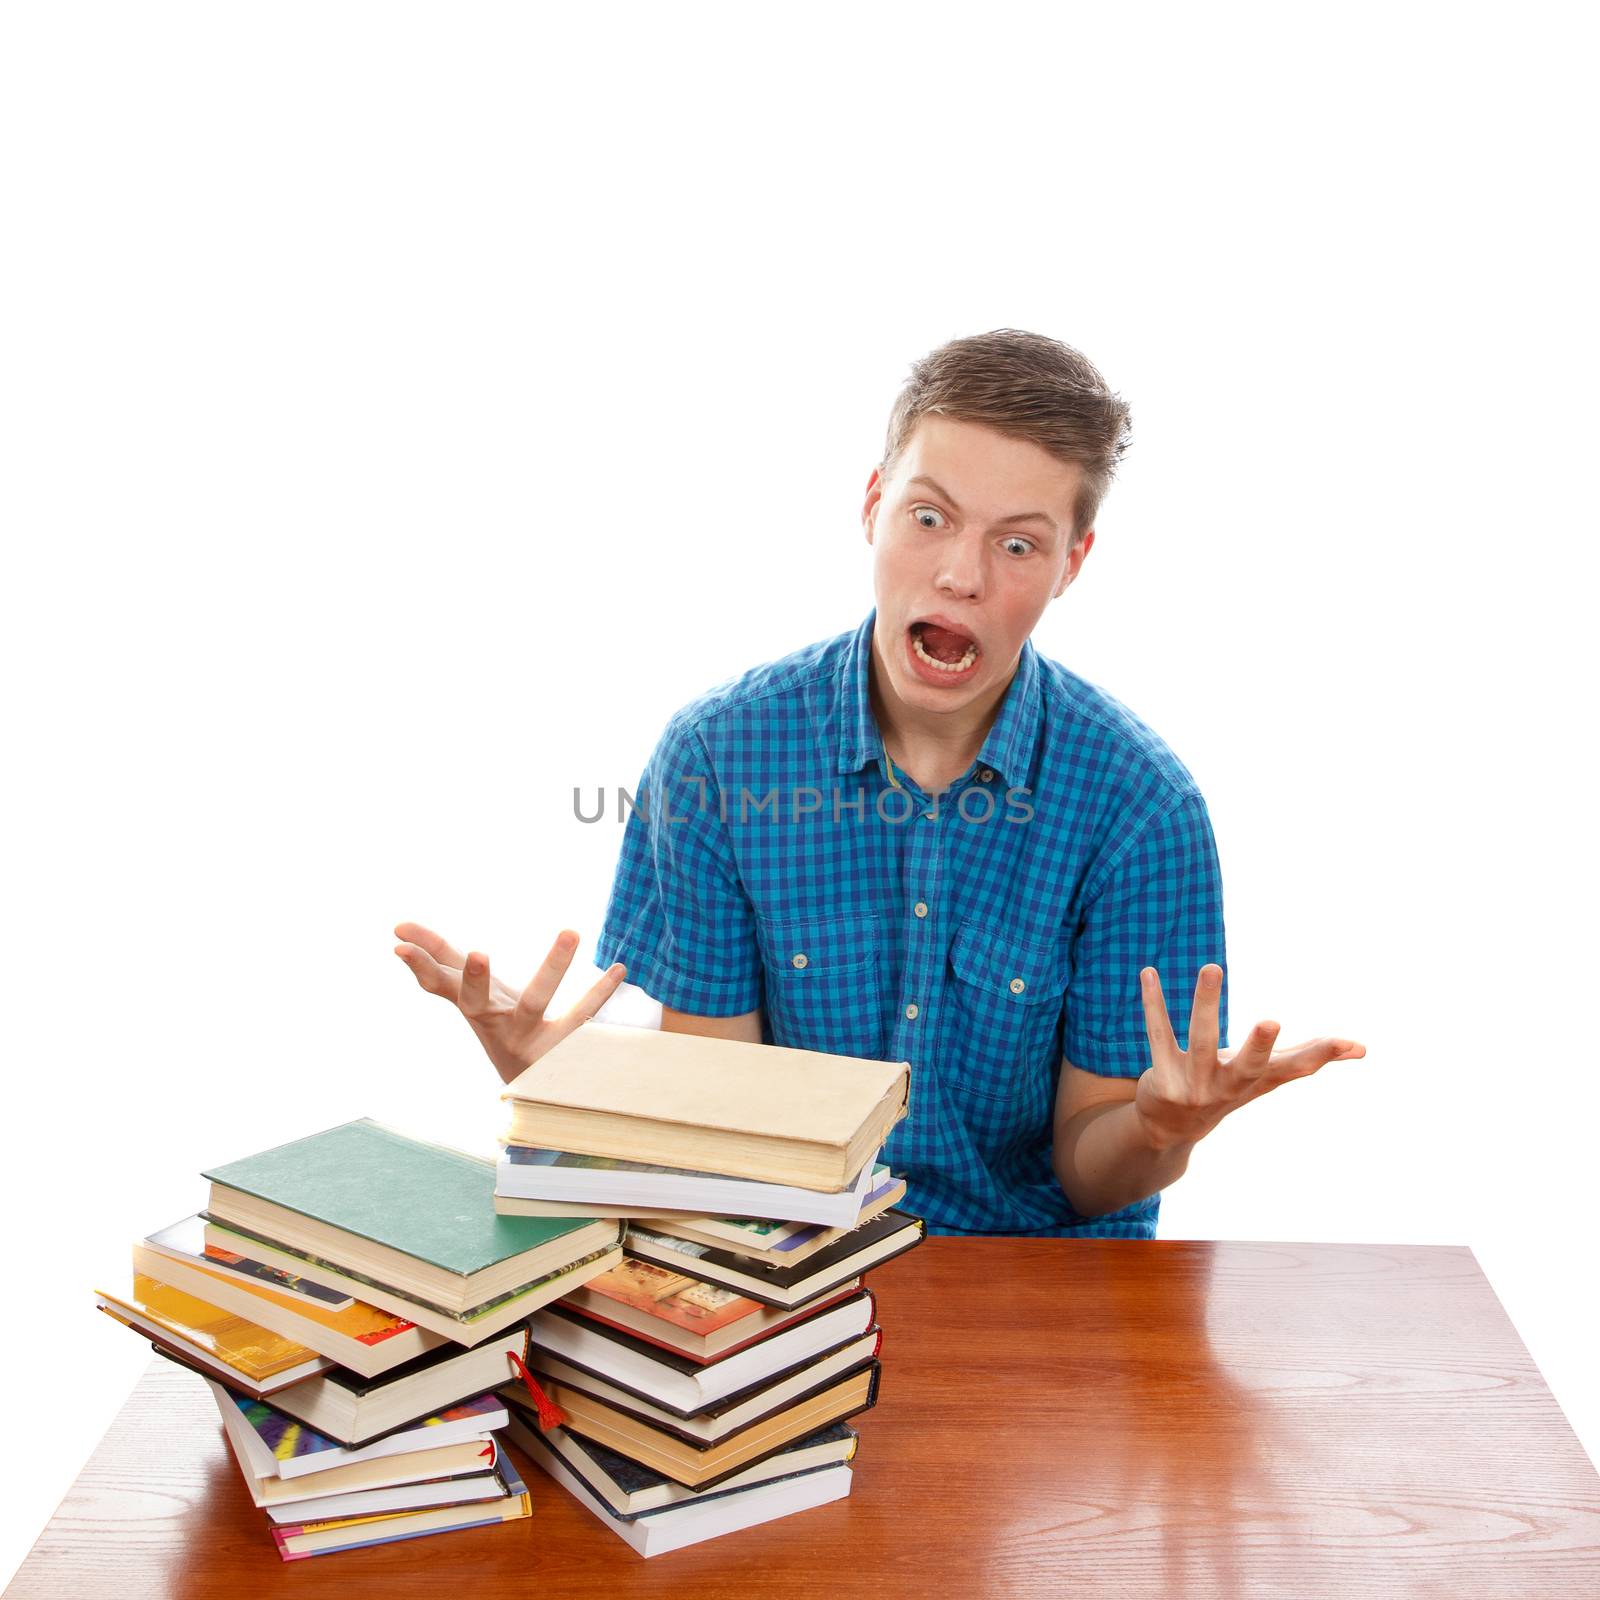 A student raging about his pile of homework